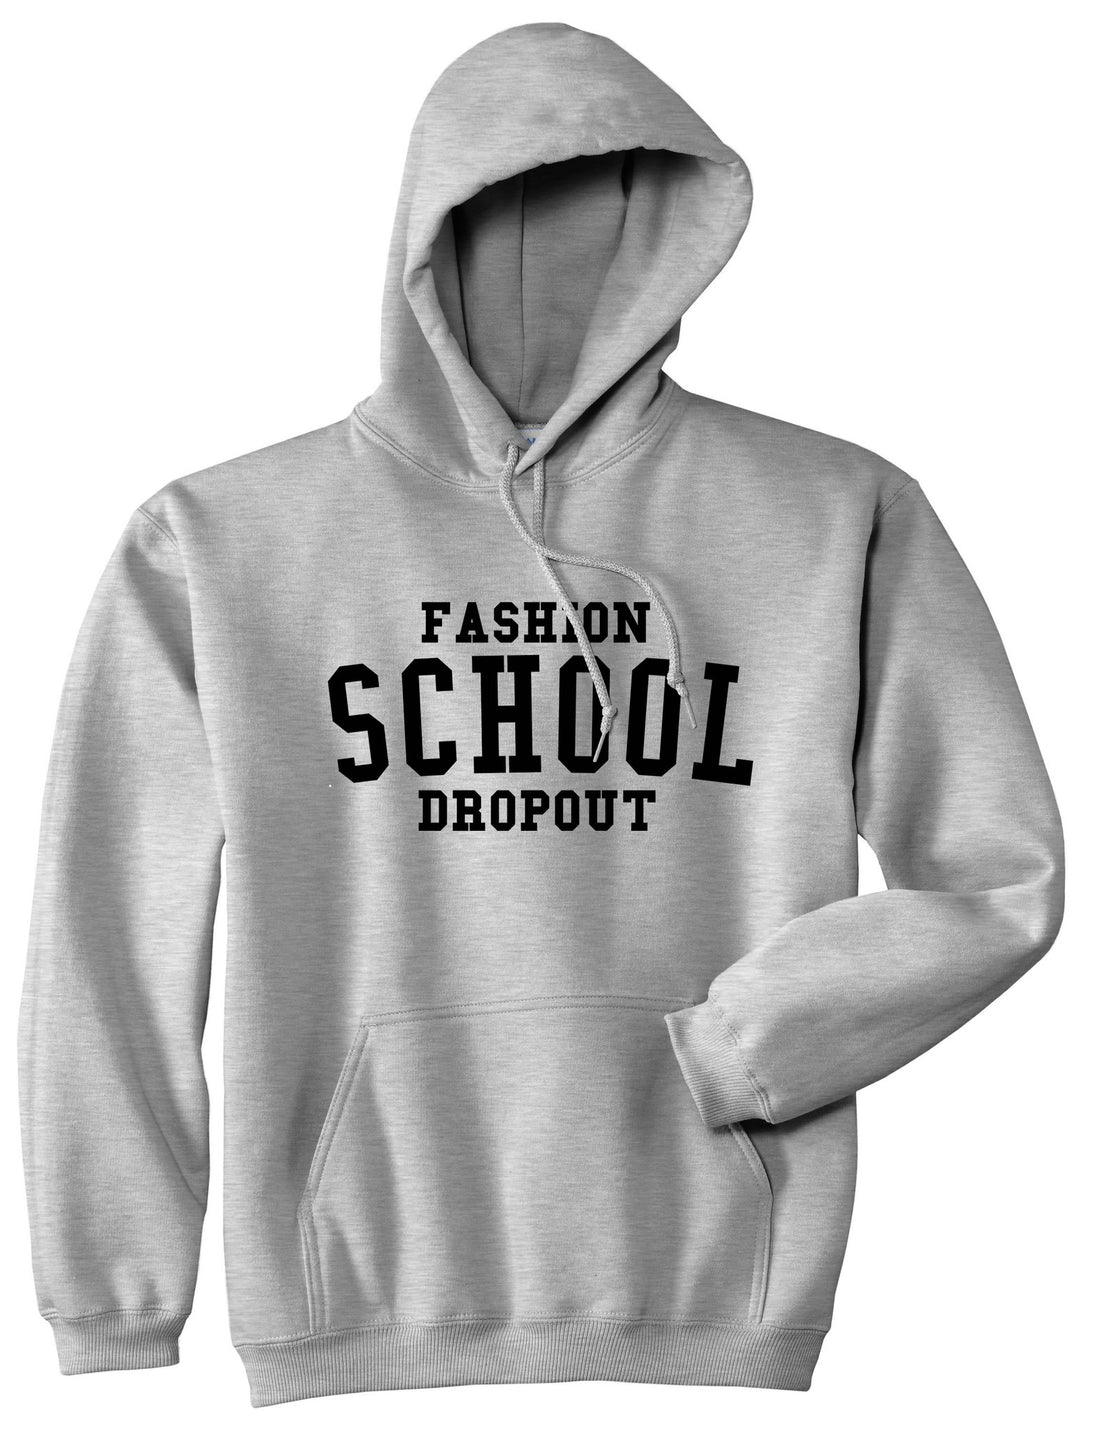 Fashion School Dropout Blogger Boys Kids Pullover Hoodie Hoody in Grey By Kings Of NY